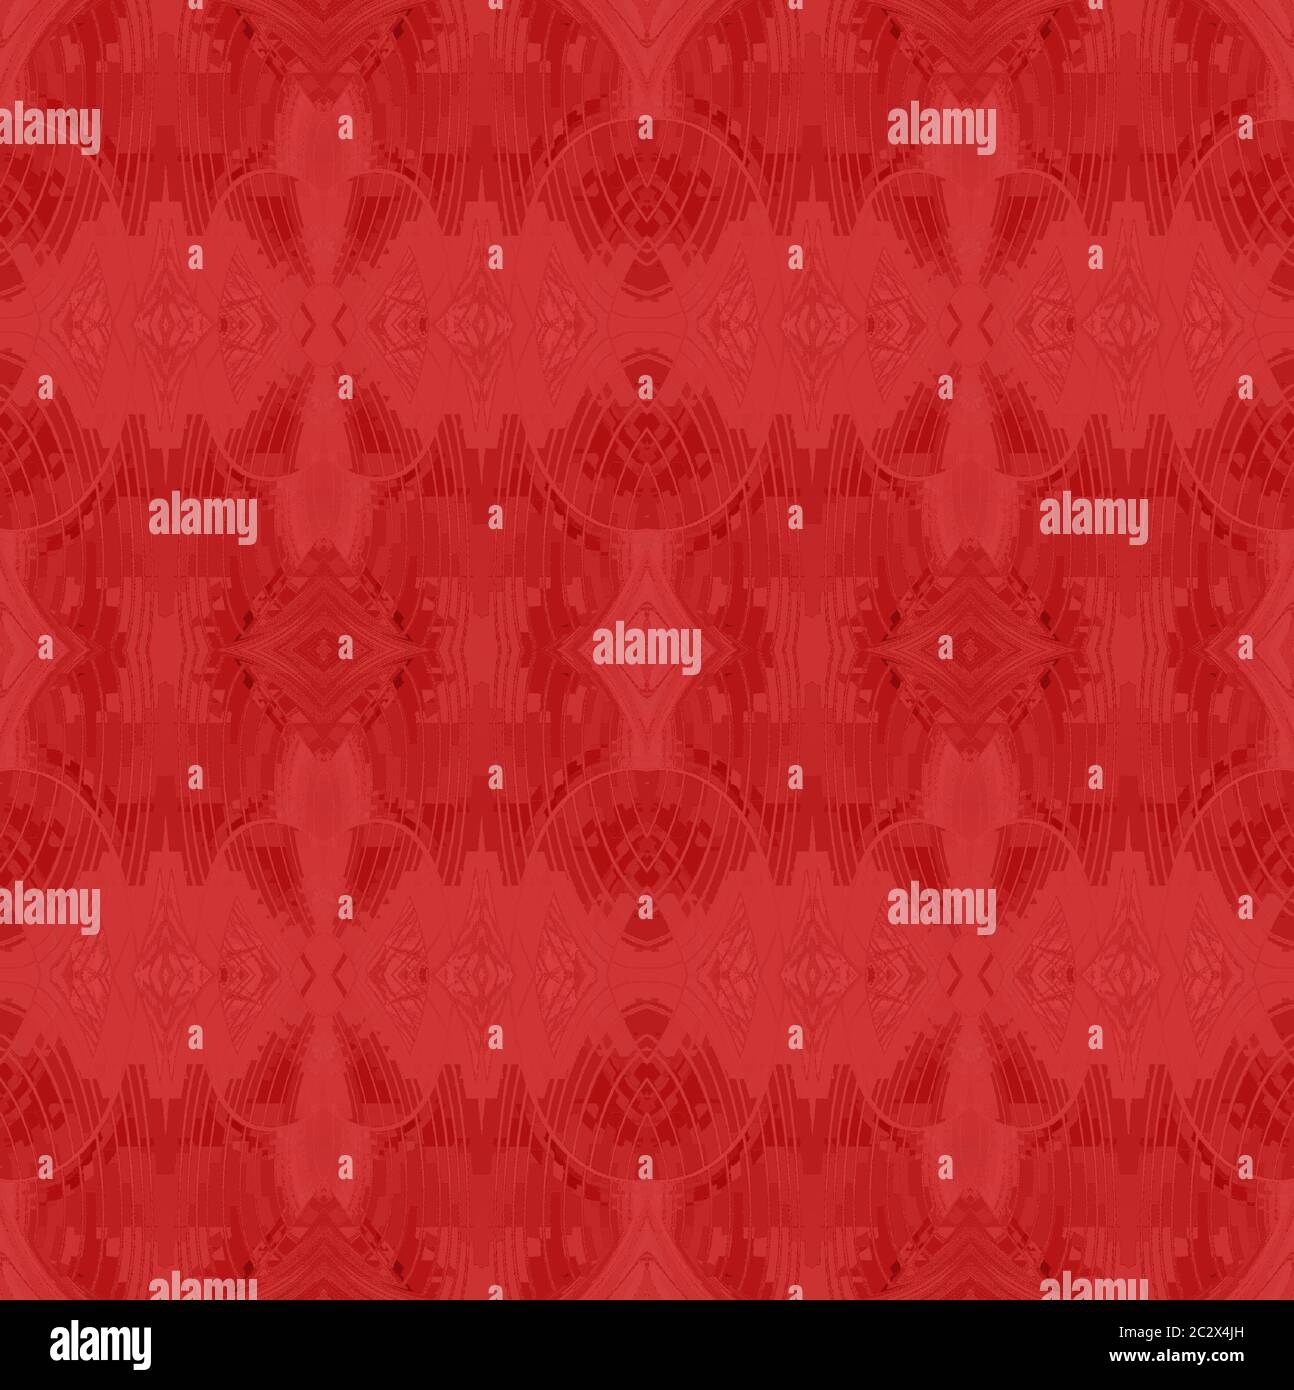 Regular ornate seamless ellipses and diamond pattern red single color Stock Photo